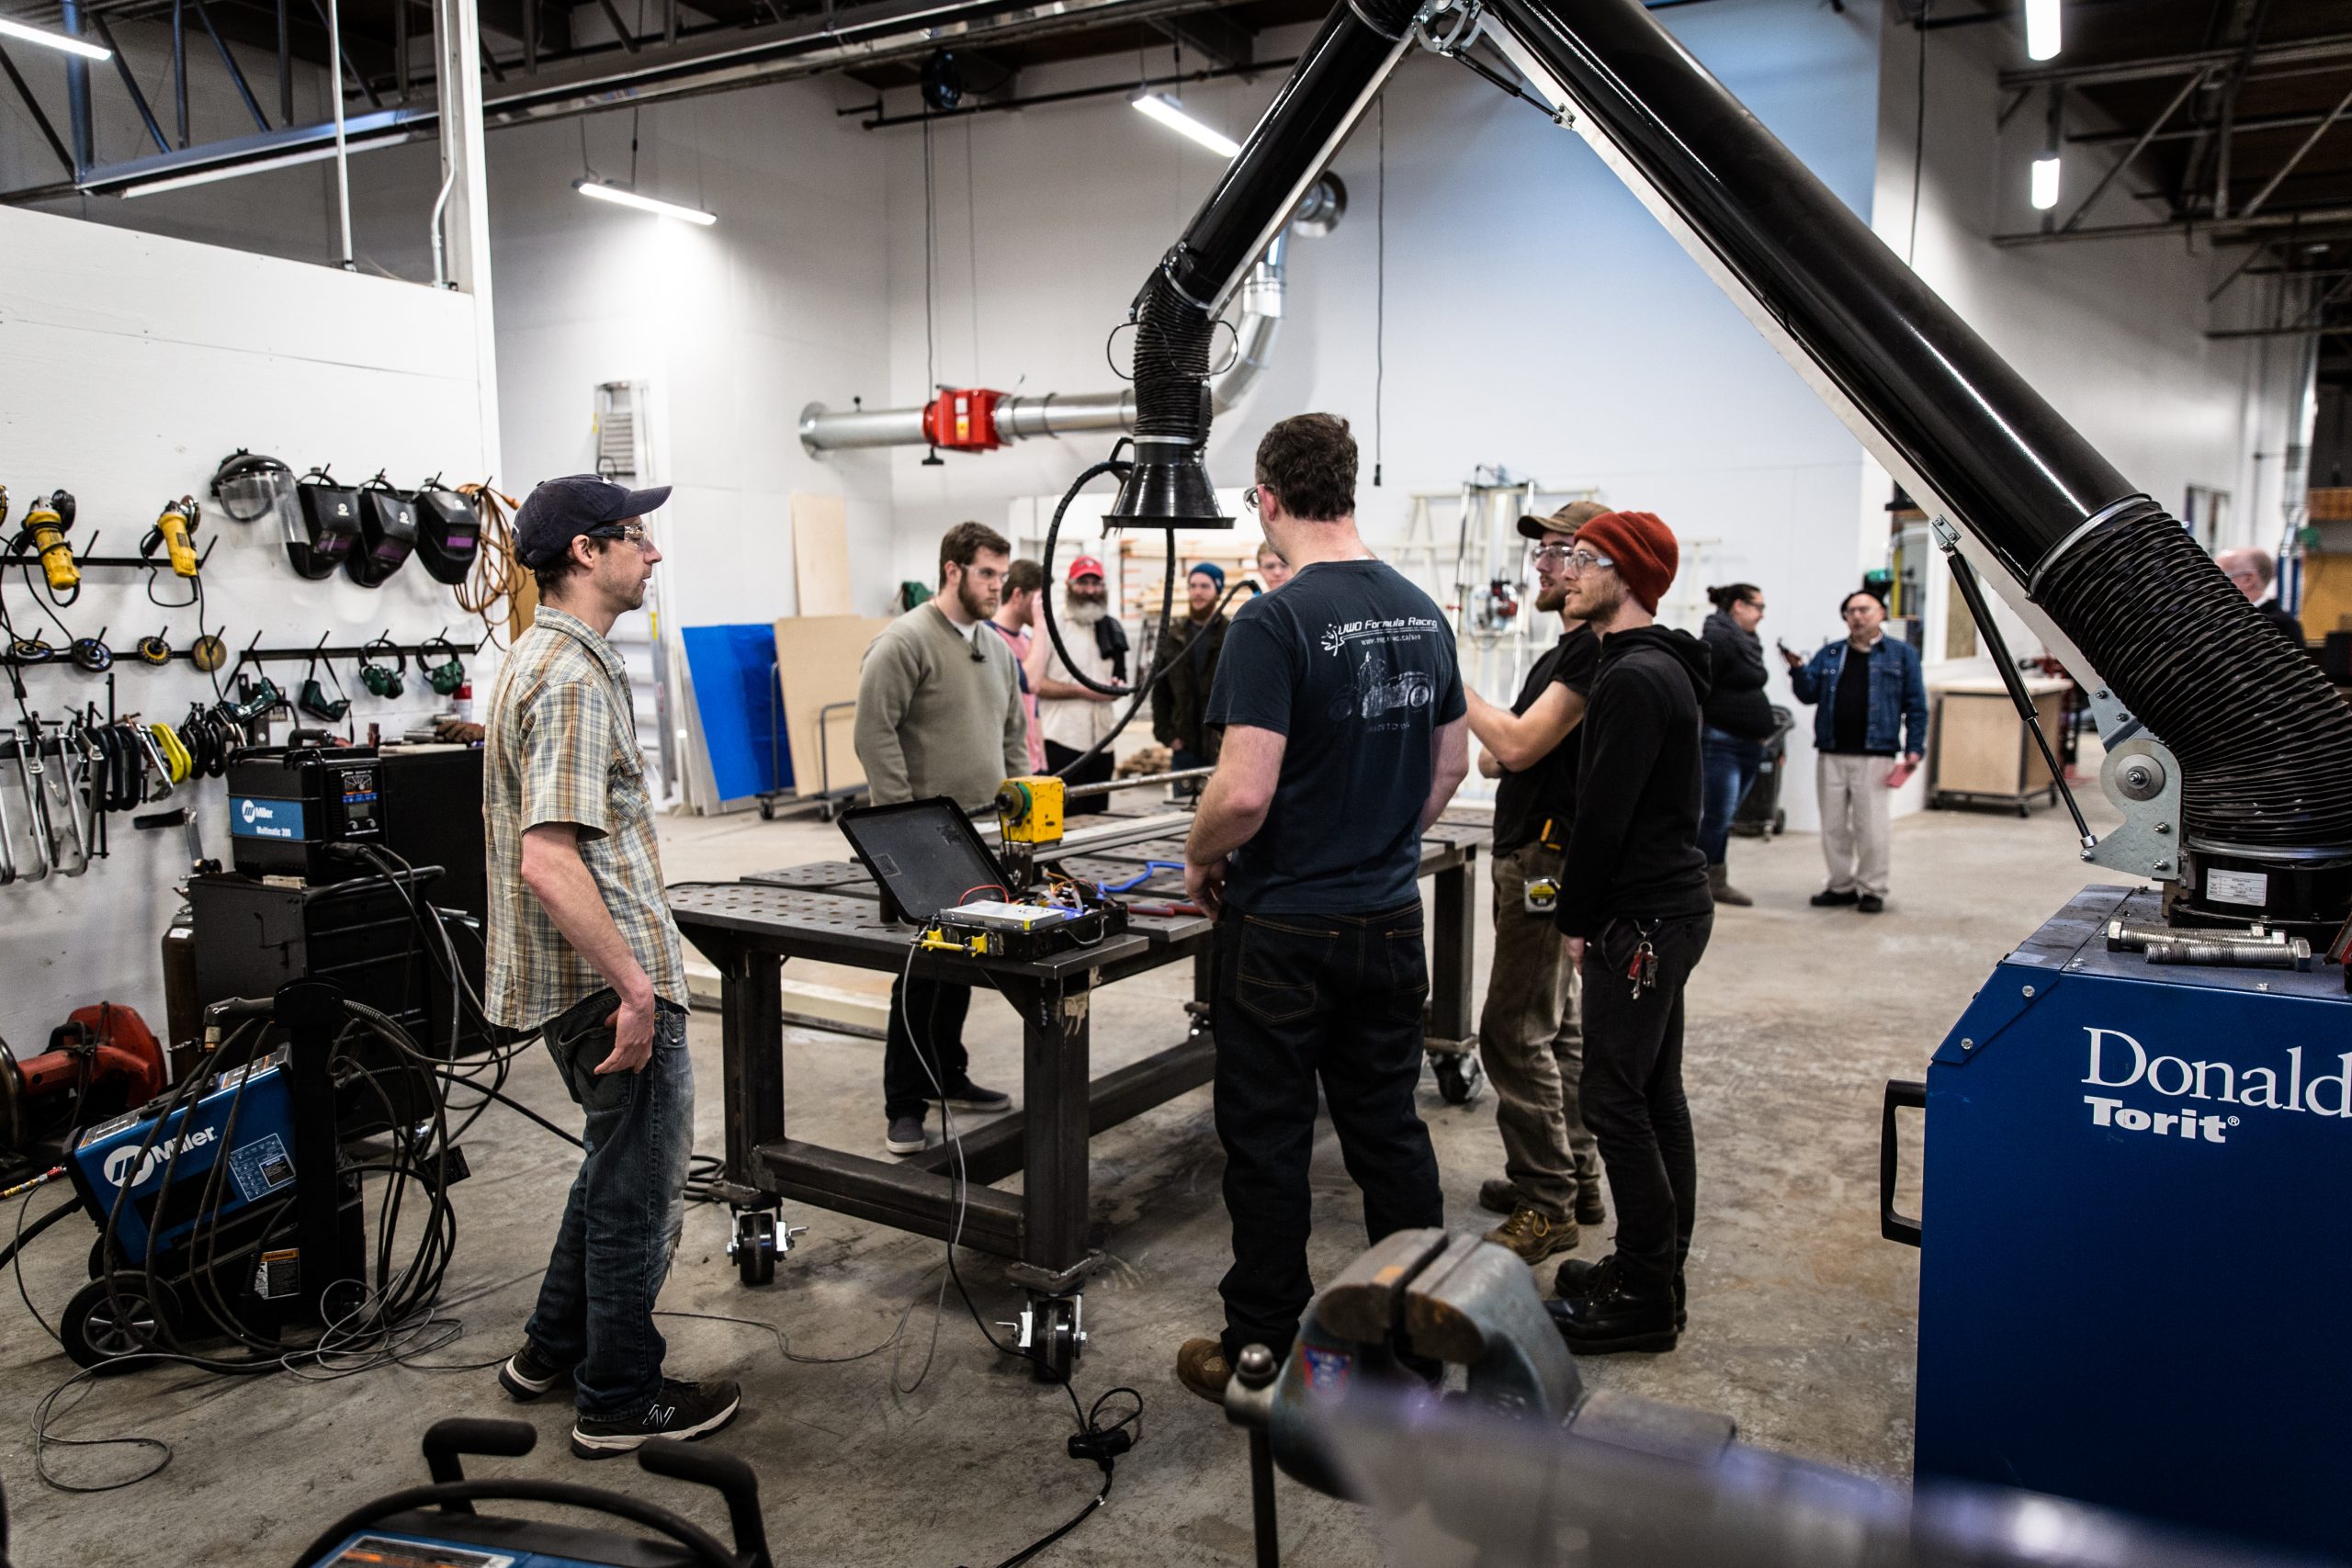 A group of engineering students working in the STEAM studio